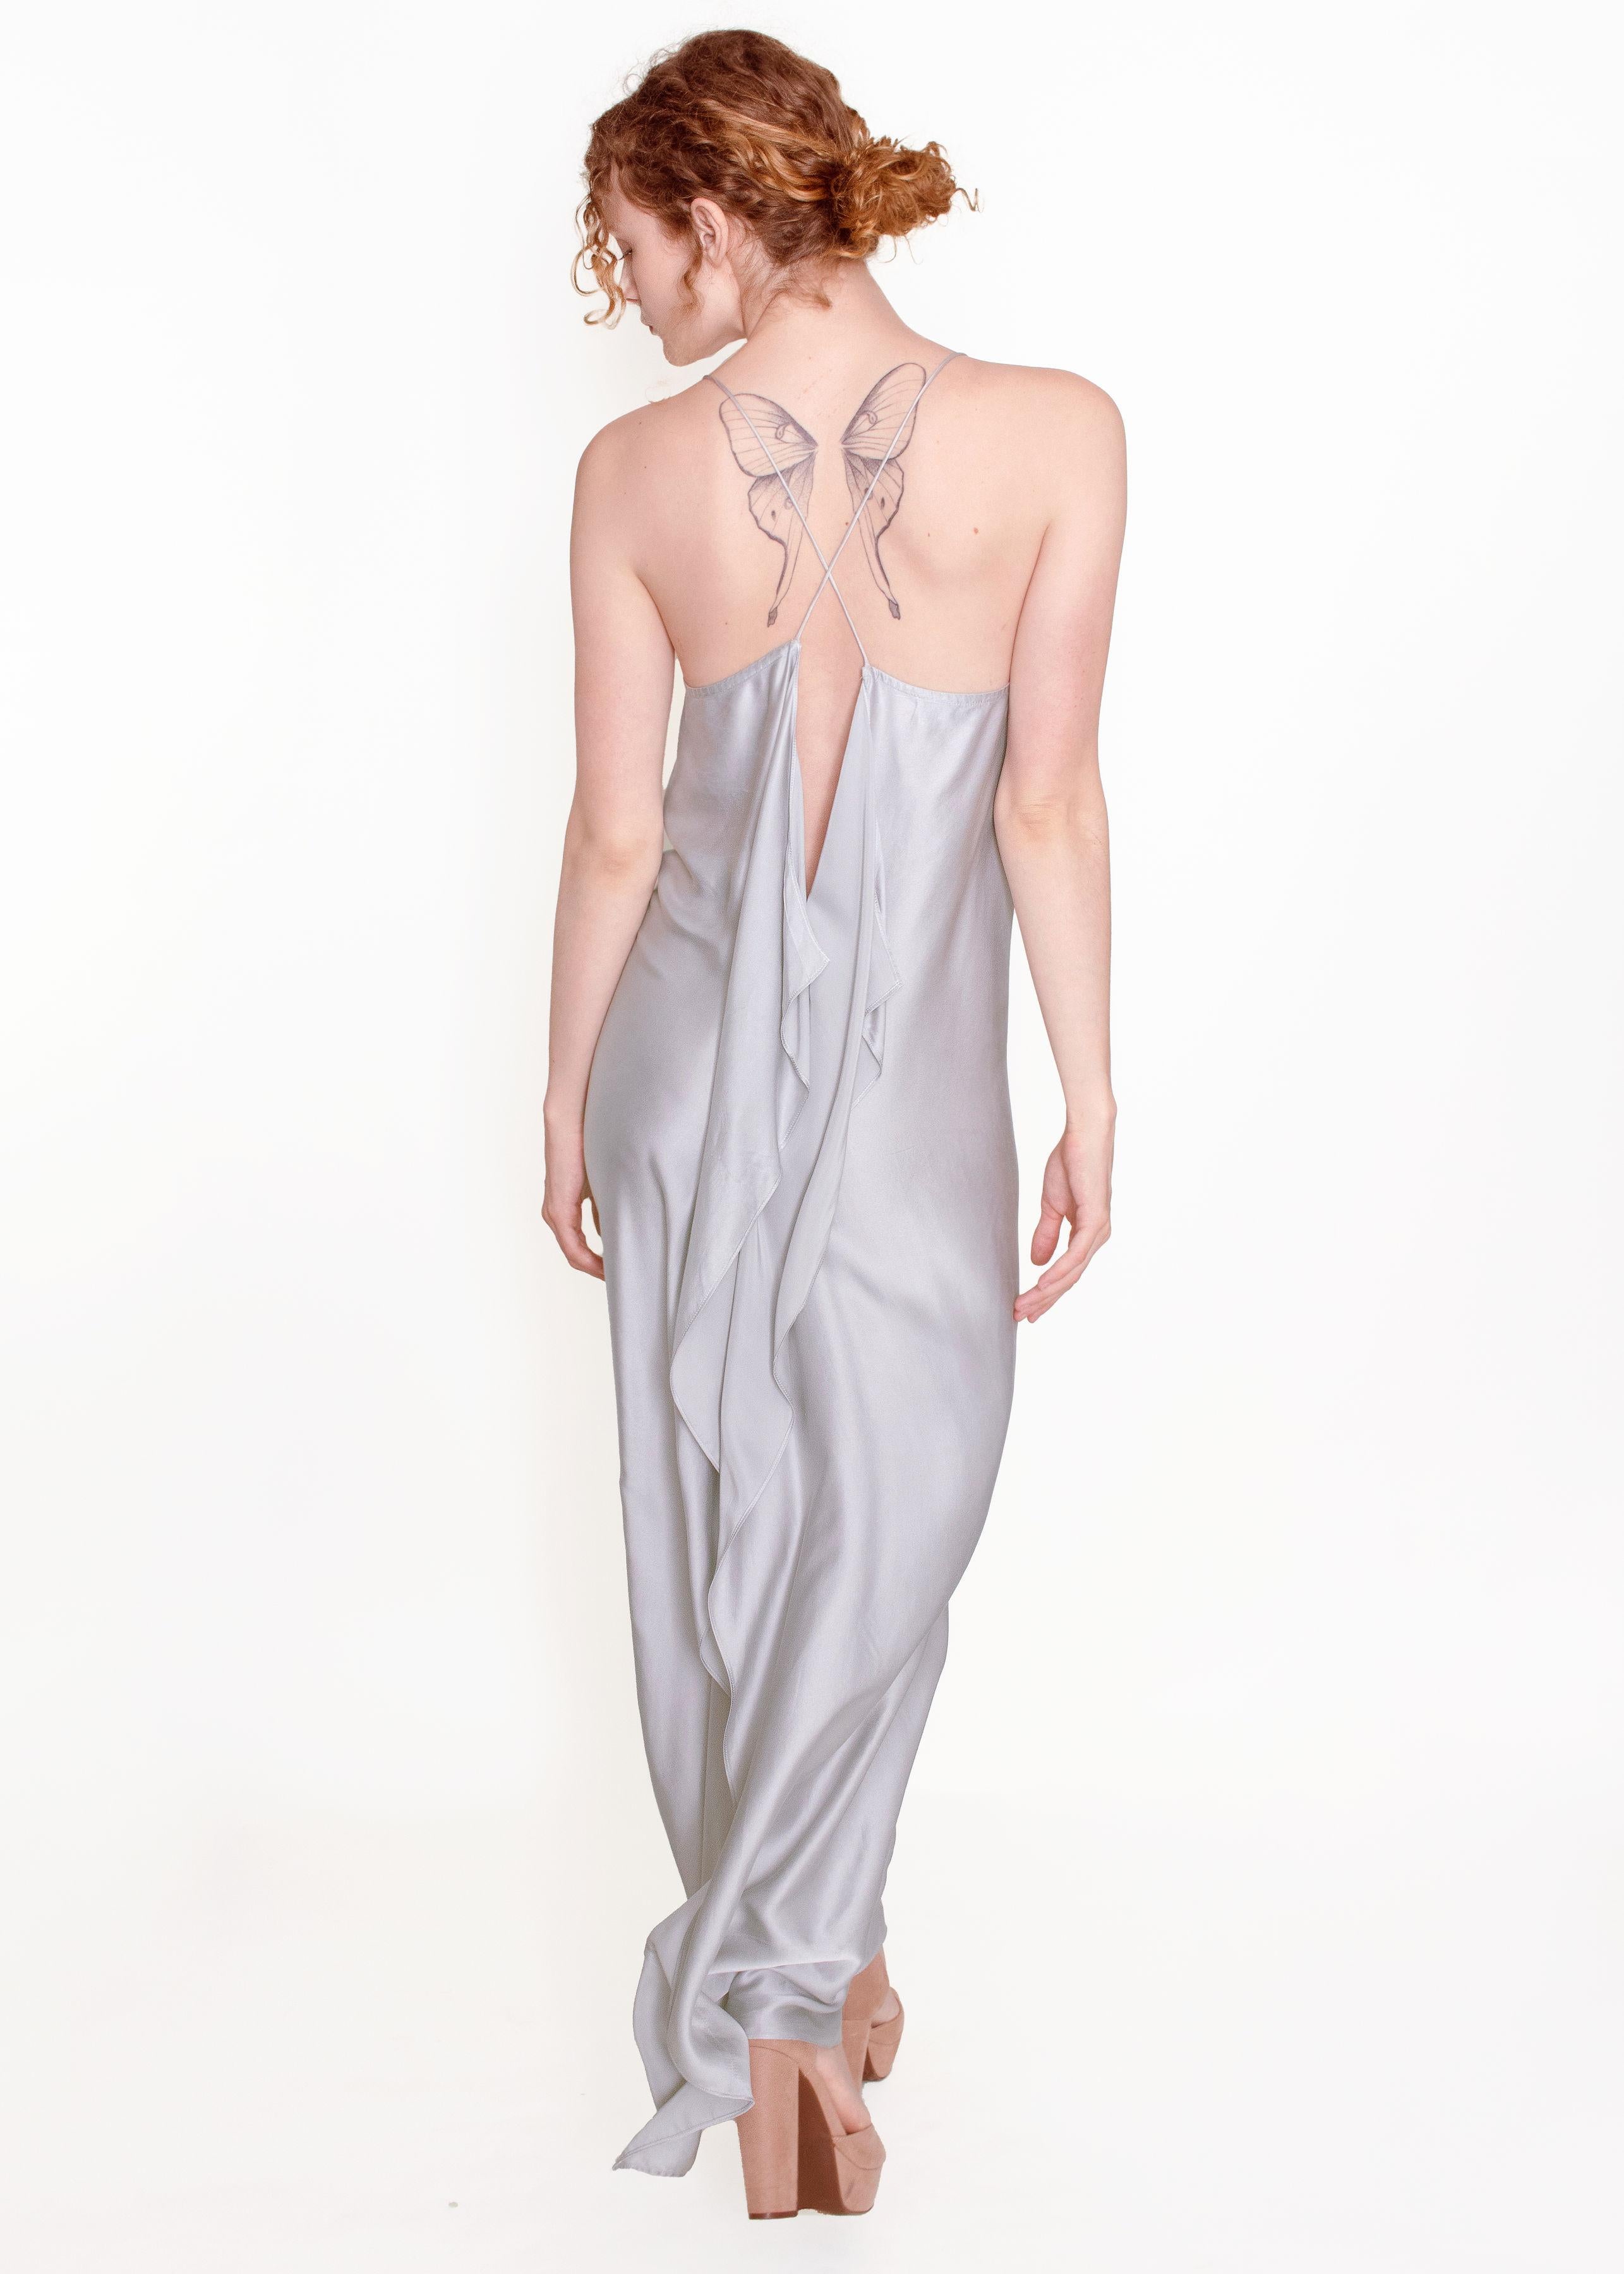 This Jane Booke Silver Cross Back Silver Slip Dress is an stunning and unique piece! It is made of 100% silk in a beautiful silver color with a very high slit down the back that cuts in the right place.  Cut on the bias for a flattering silhouette,